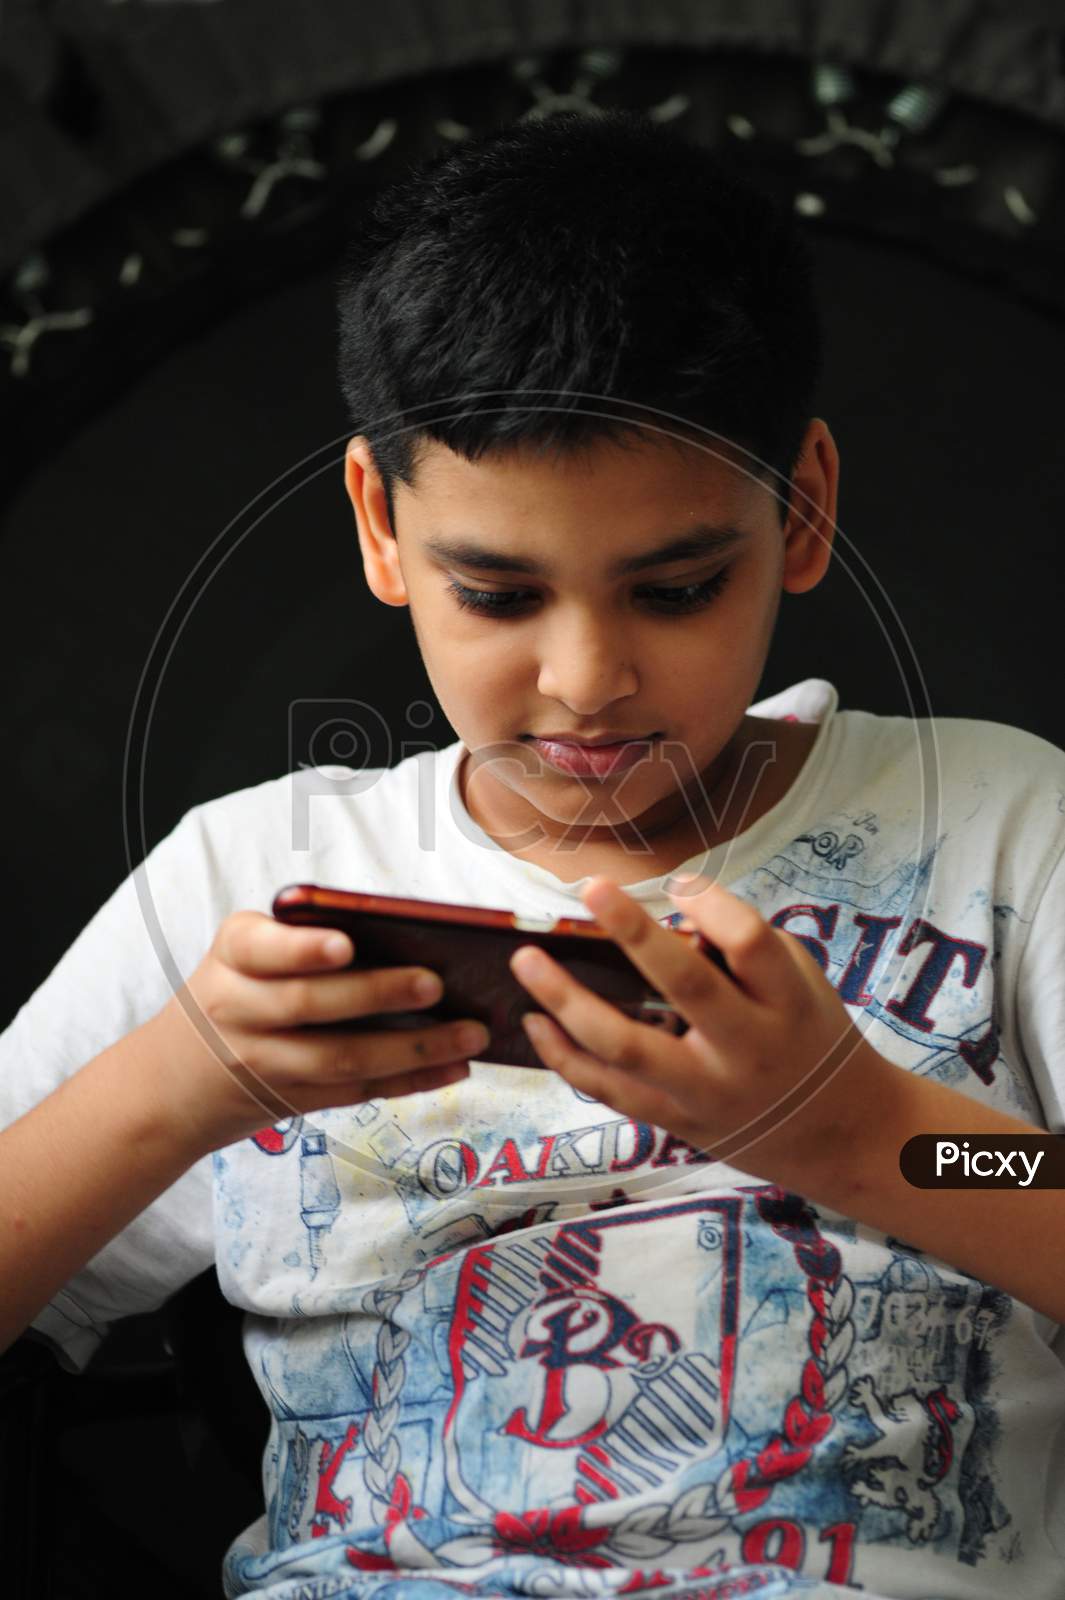 Boy engrossed in playing a game on a mobile phone